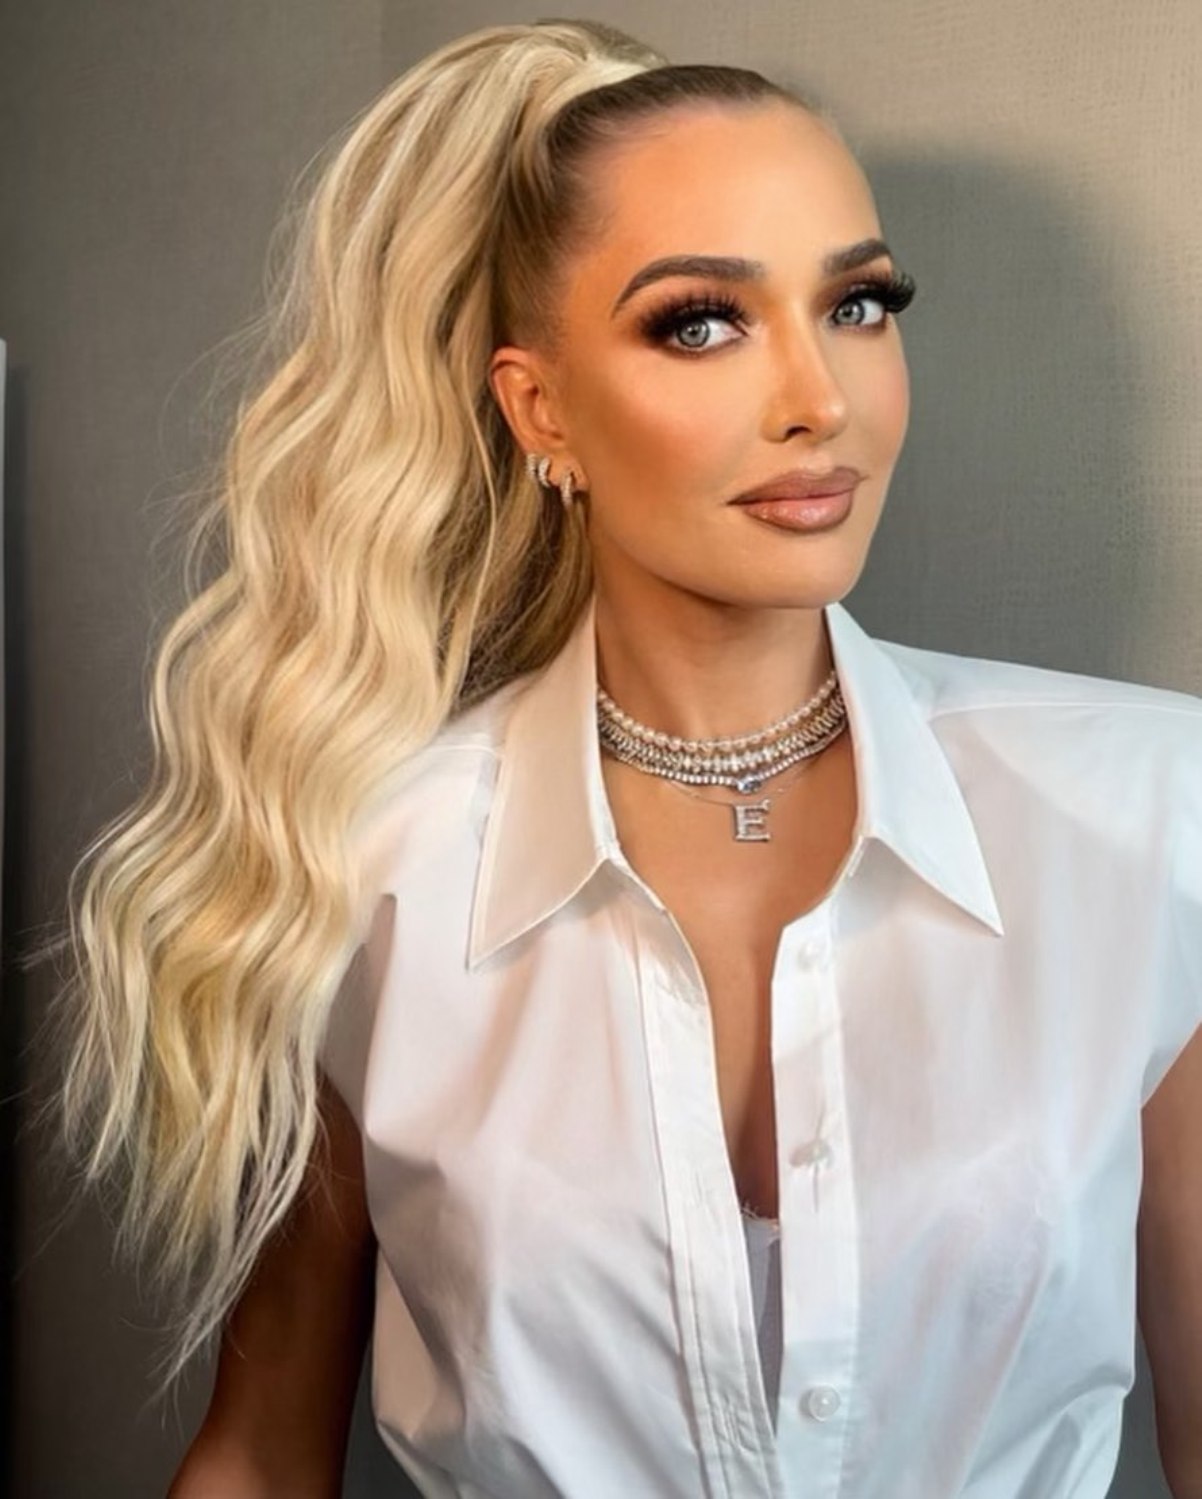 RHOBH's Erika Jayne Requests Payment for Diamond Earrings as Attorney Warns of "Very Serious" Claims in "Complex" Fraud Case Against Her